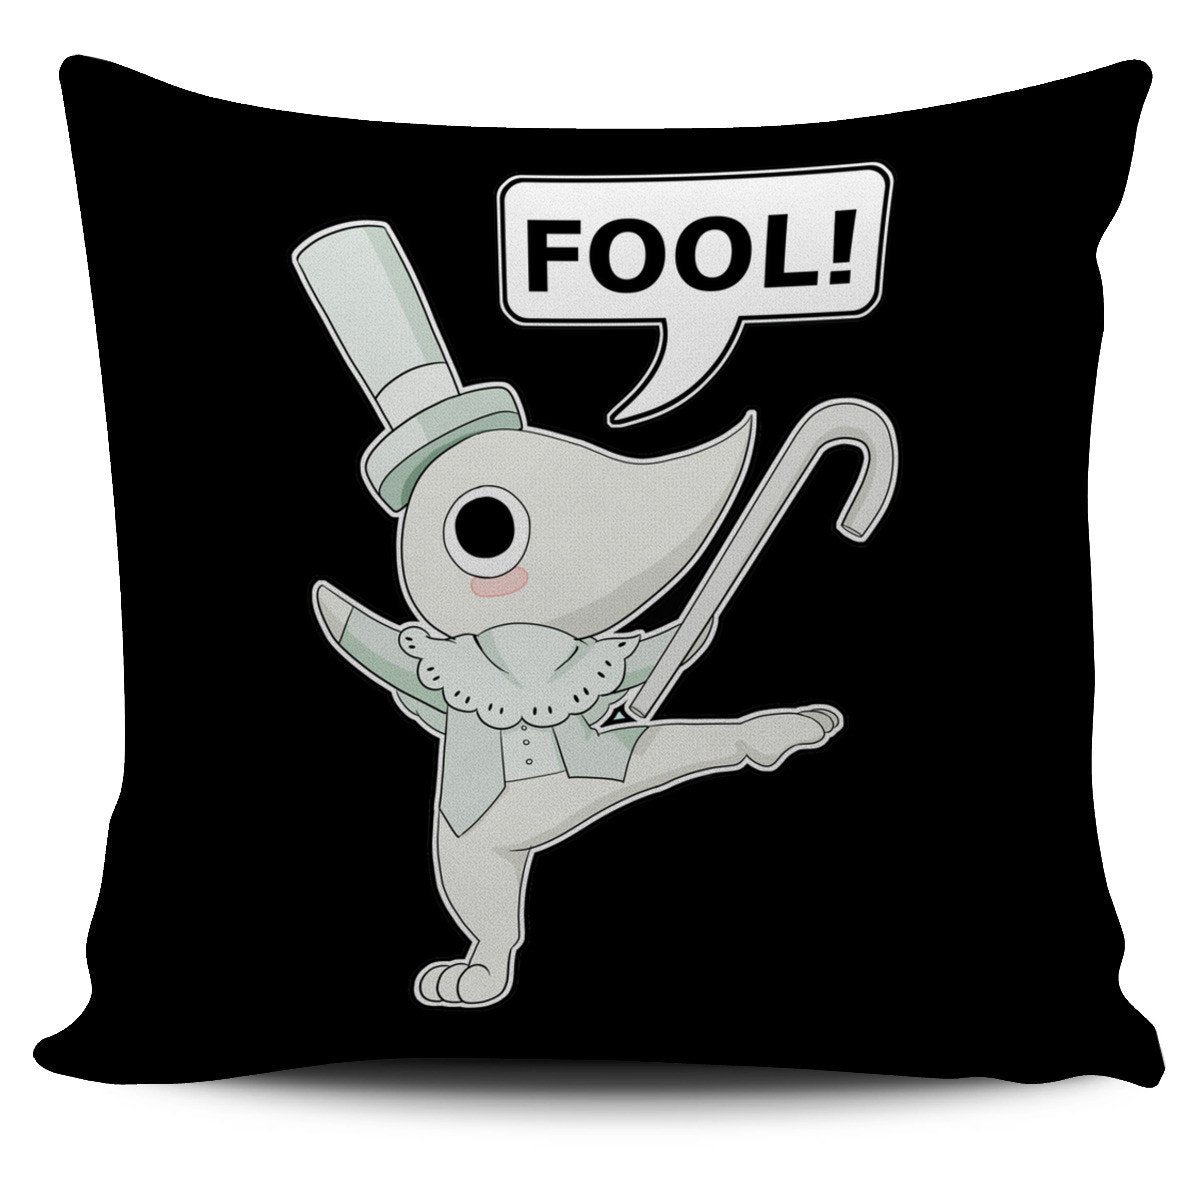 Soul Eater Excalibur Pillow Cover